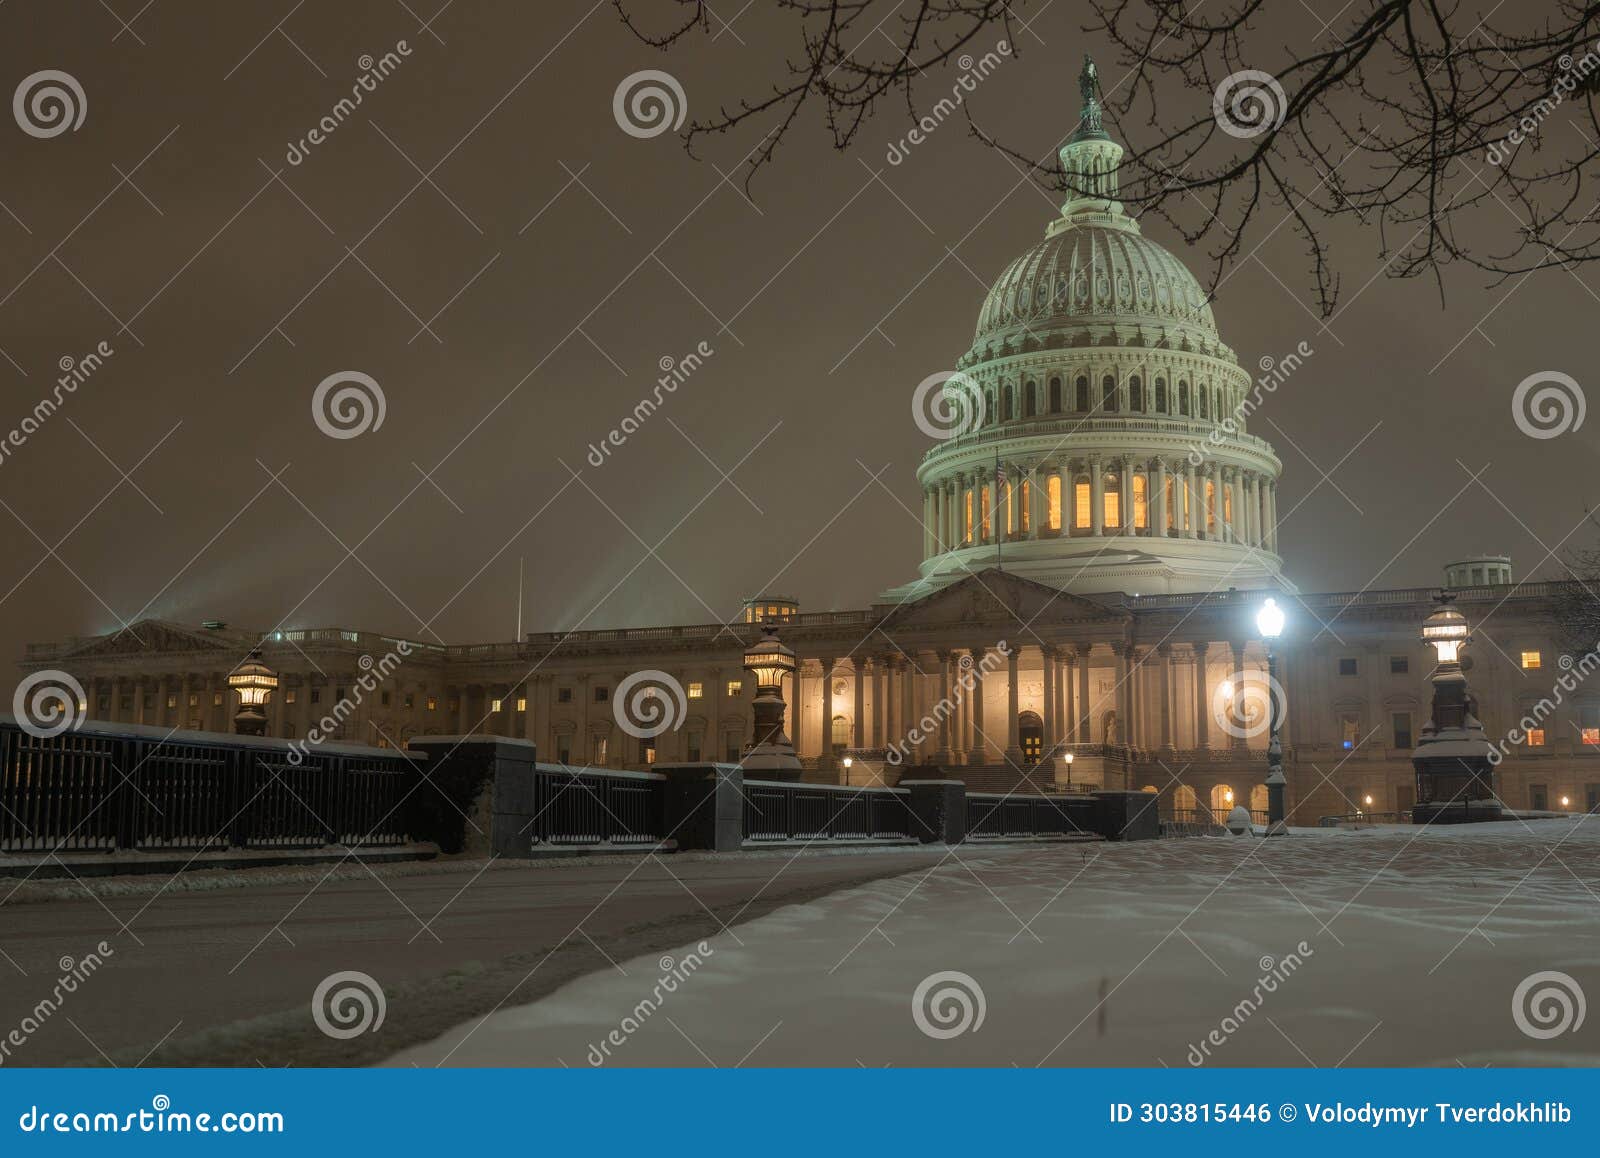 capitol building in snow. winter capitol hill, washington dc. capitols dome in winter night snow. after the snow